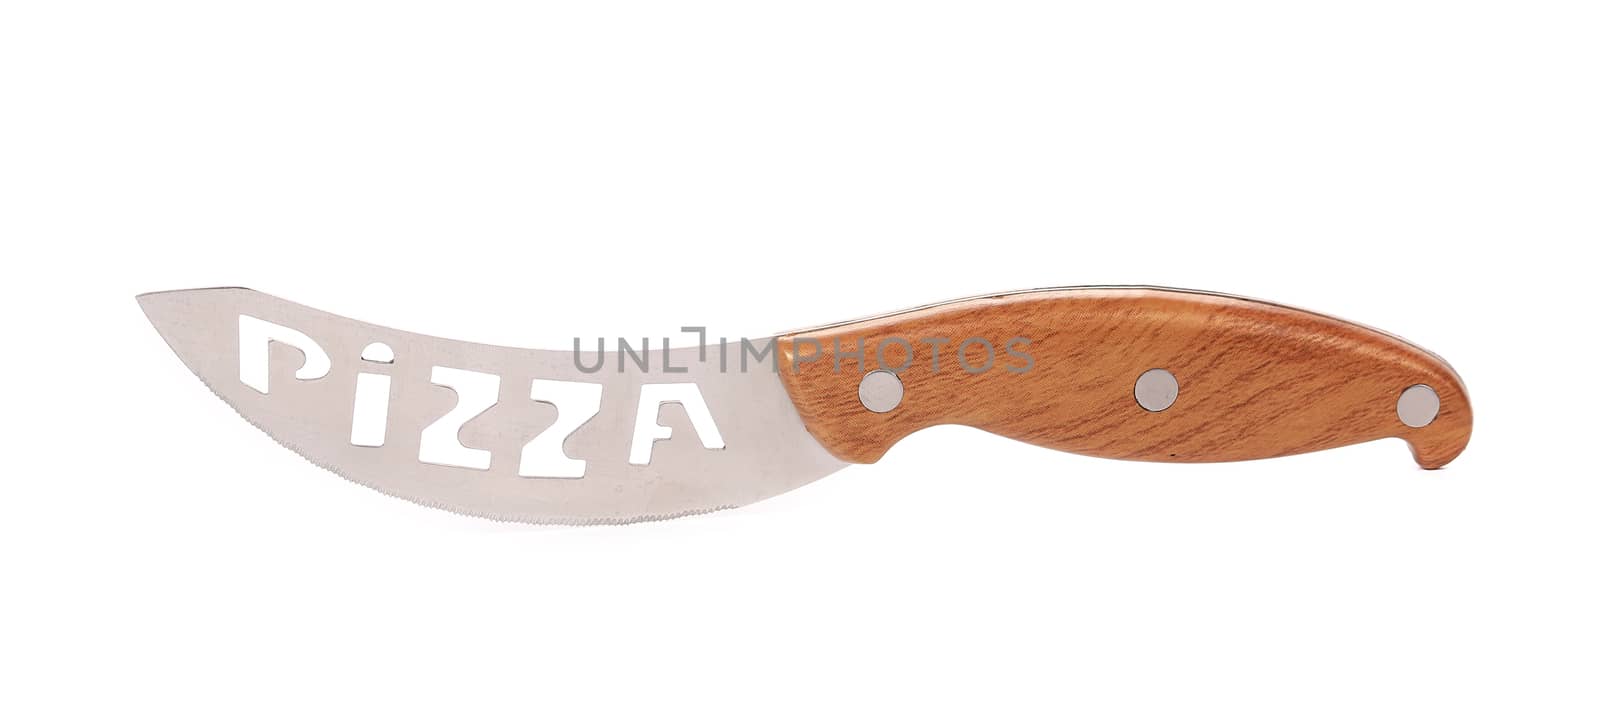 Knife for cutting pizza. by indigolotos